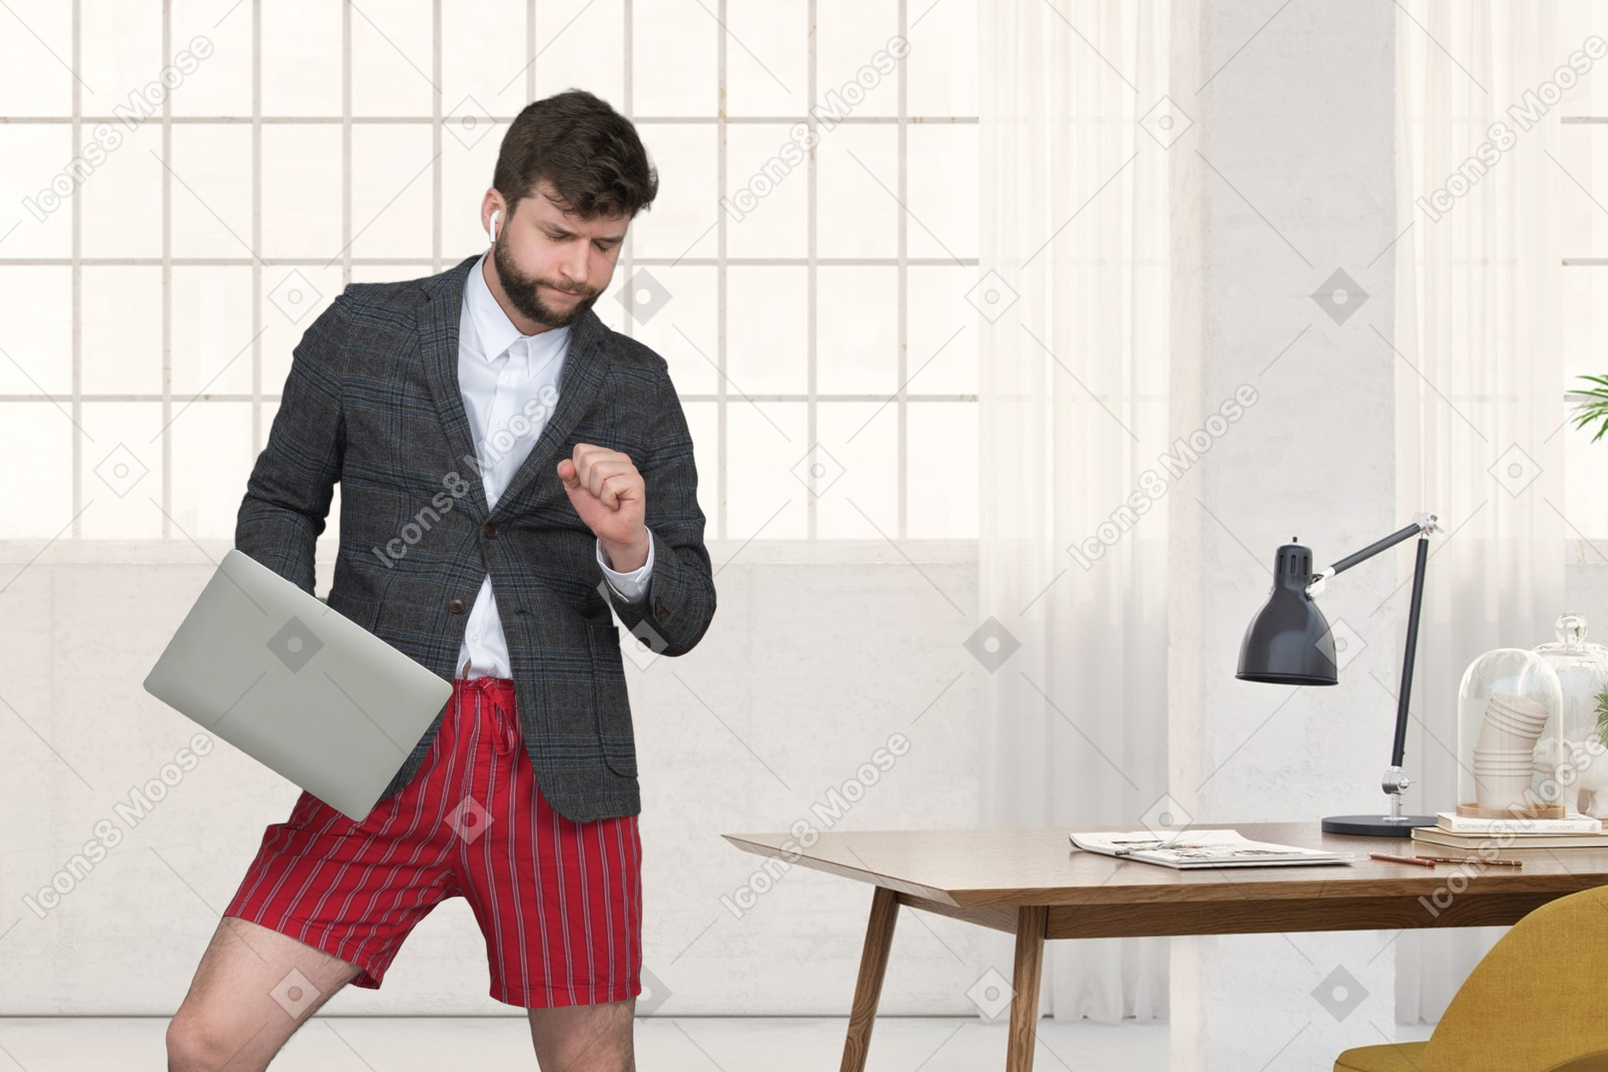 A man in shorts and a blazer is holding a laptop